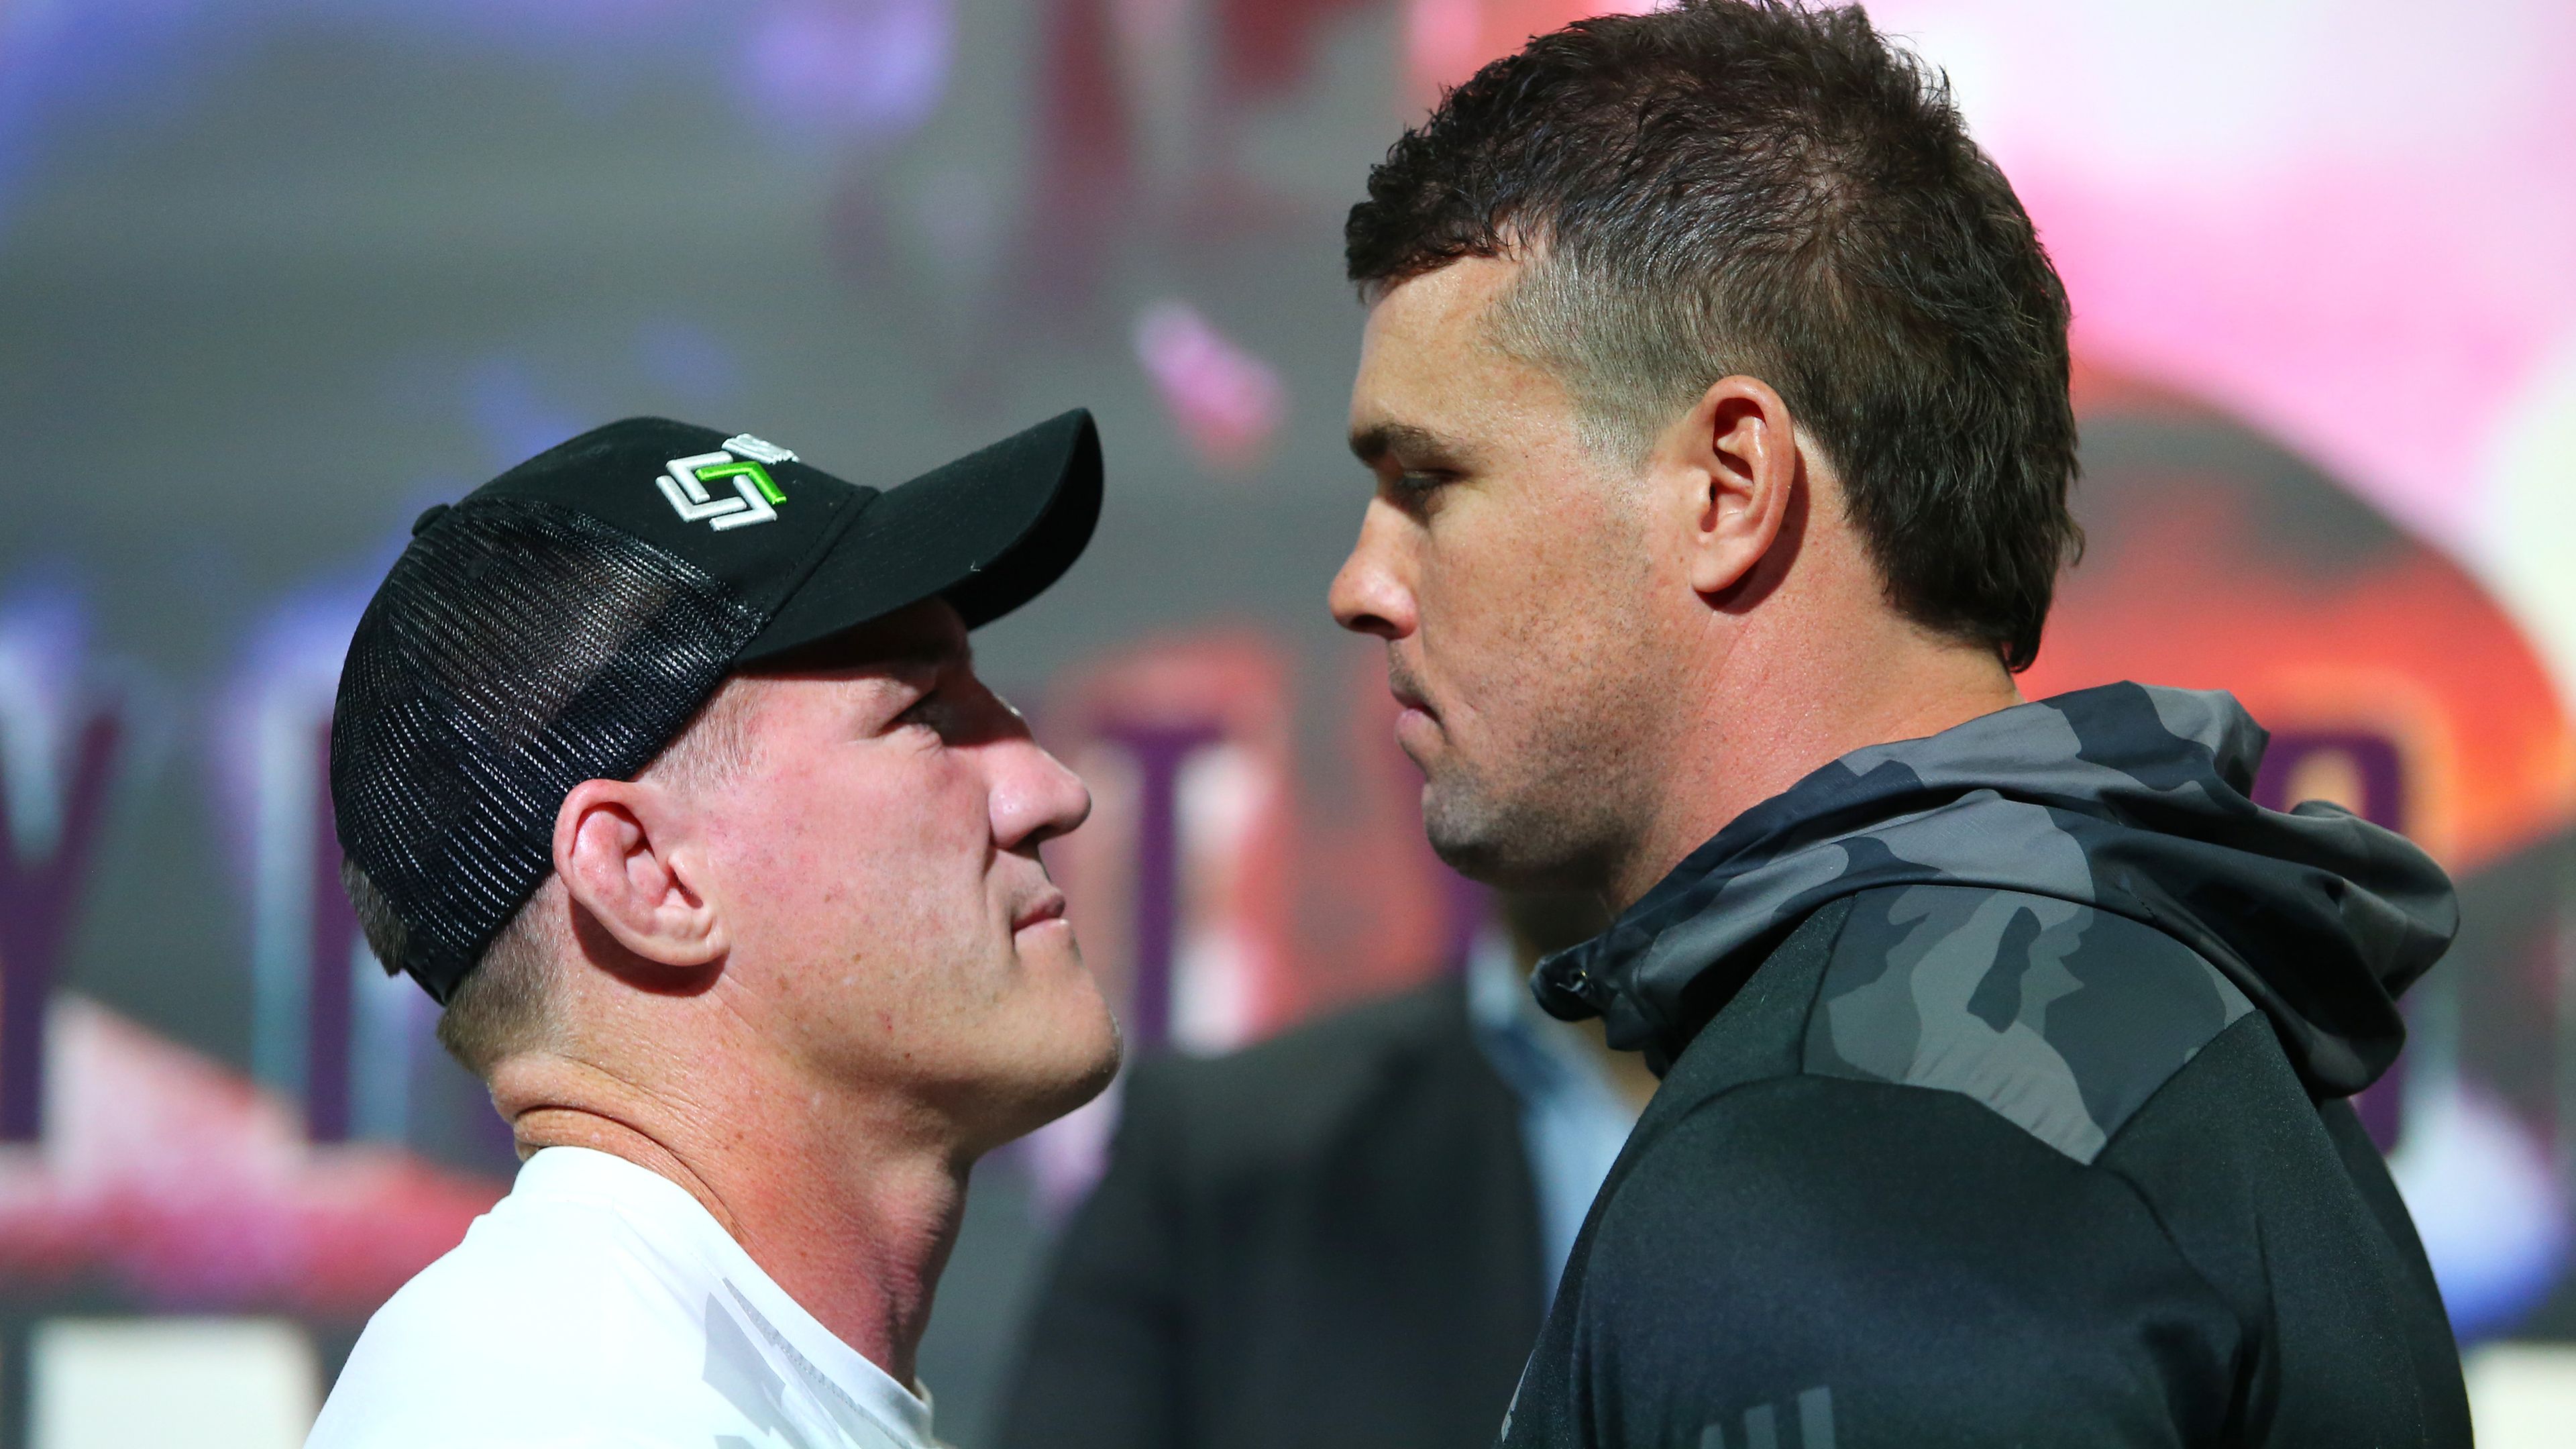 Paul Gallen to use 'whatever way necessary' to overpower Darcy Lussick